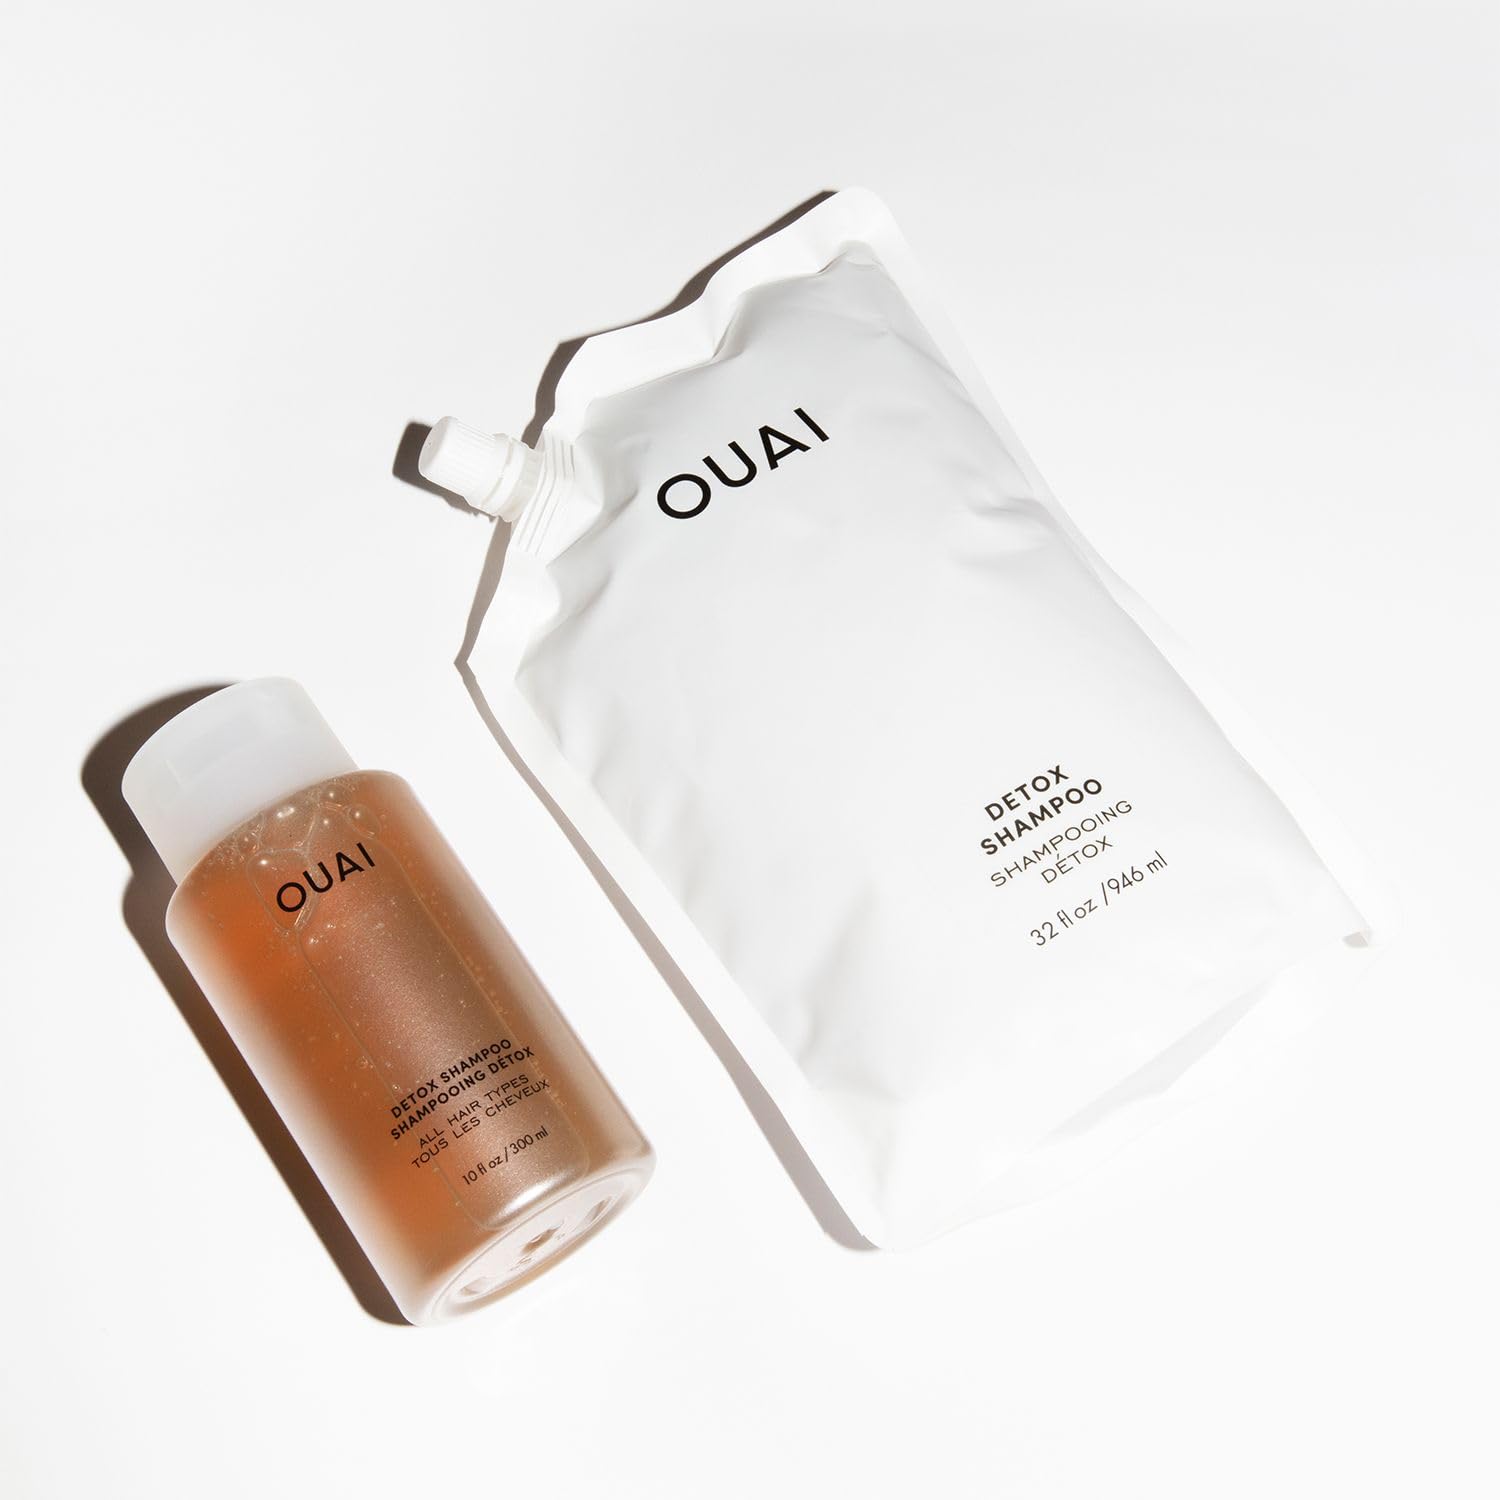 OUAI Detox Shampoo - Clarifying Shampoo for Build Up, Dirt, Oil, Product and Hard Water - Apple Cider Vinegar & Keratin for Clean, Refreshed Hair - Sulfate-Free Hair Care (10 oz) : Beauty & Personal Care